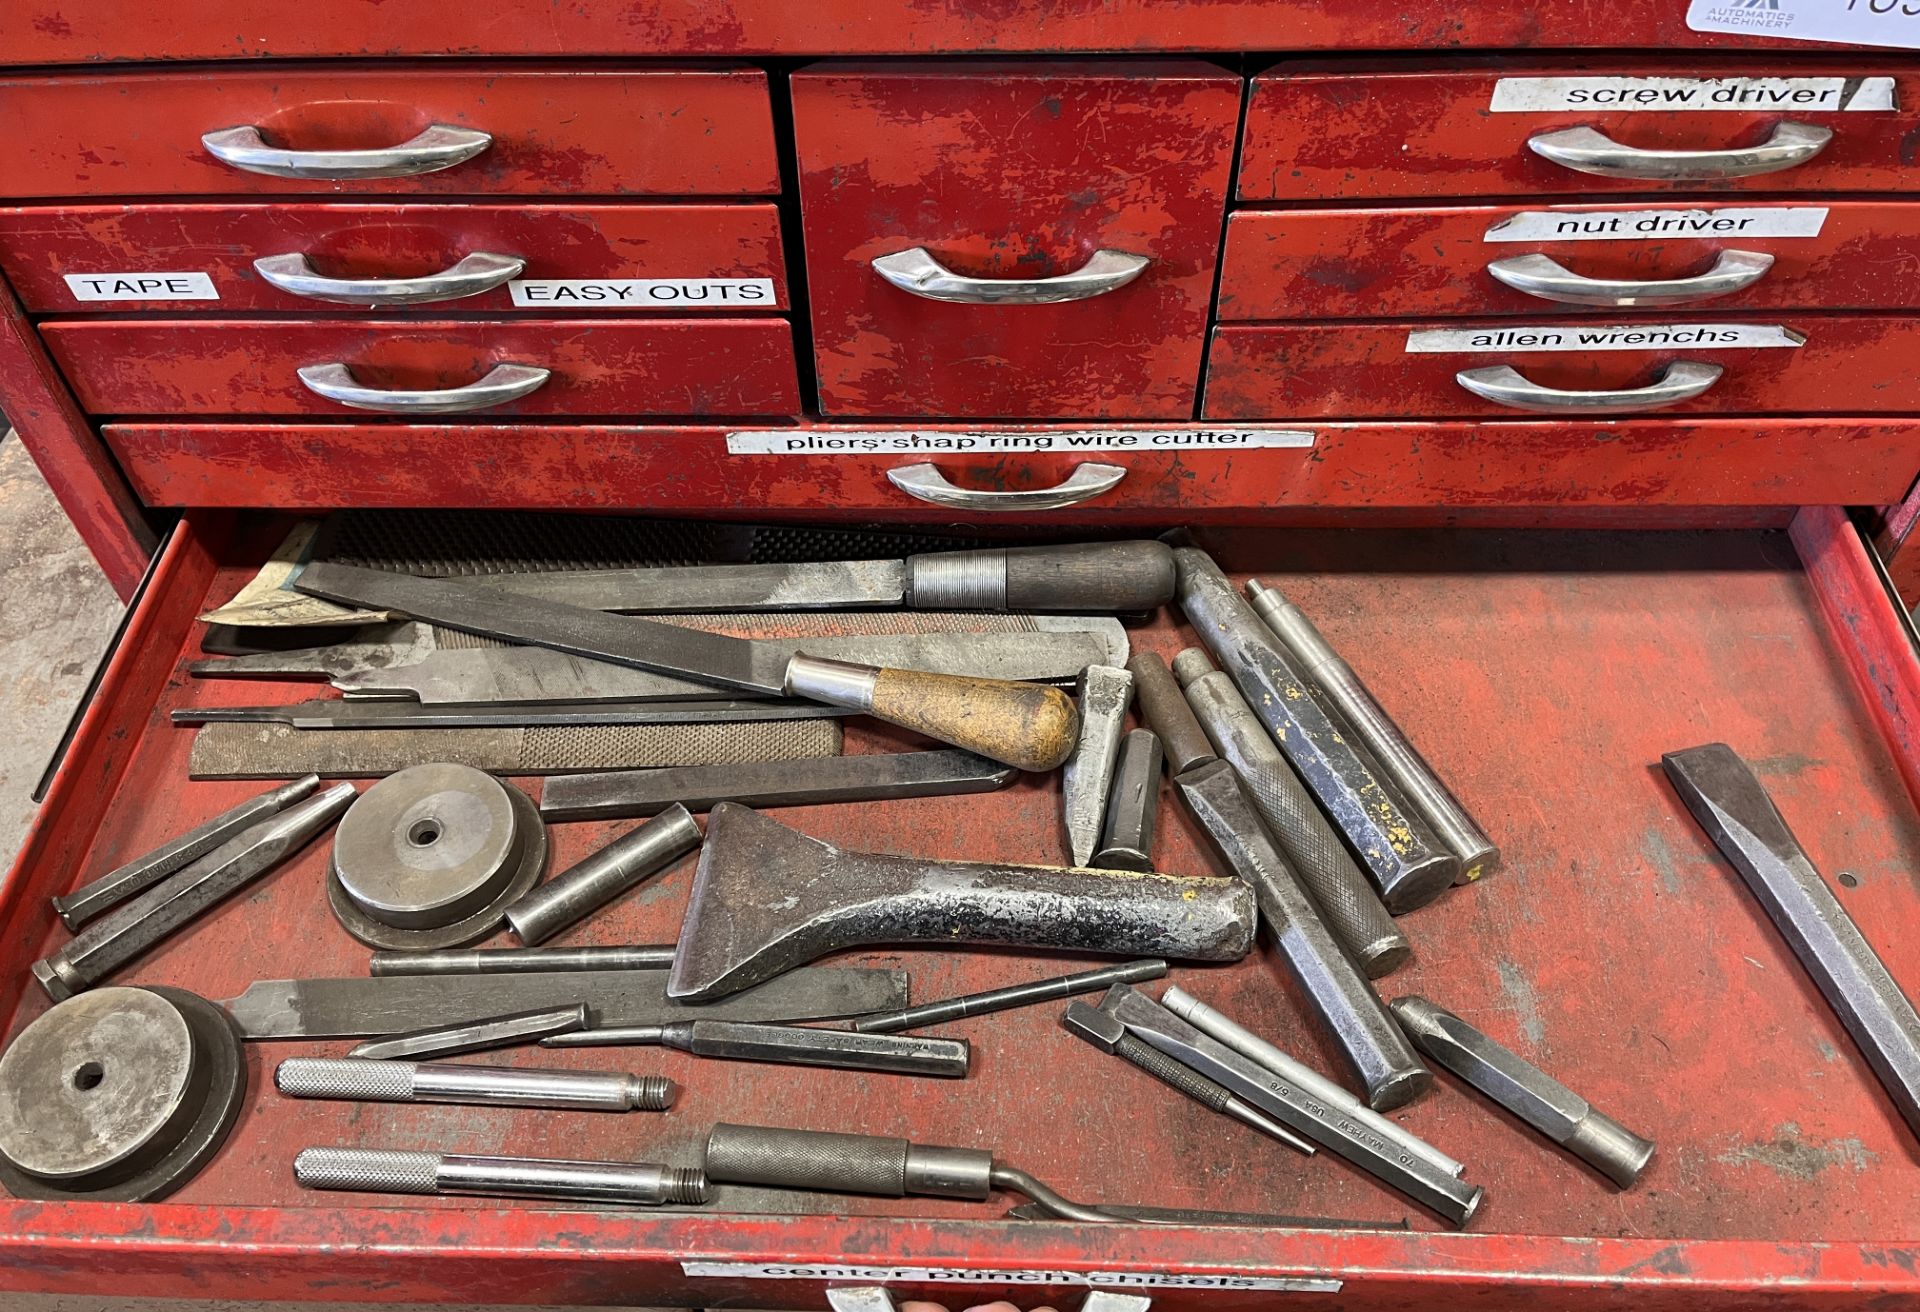 Toolbox with contents - Image 7 of 9